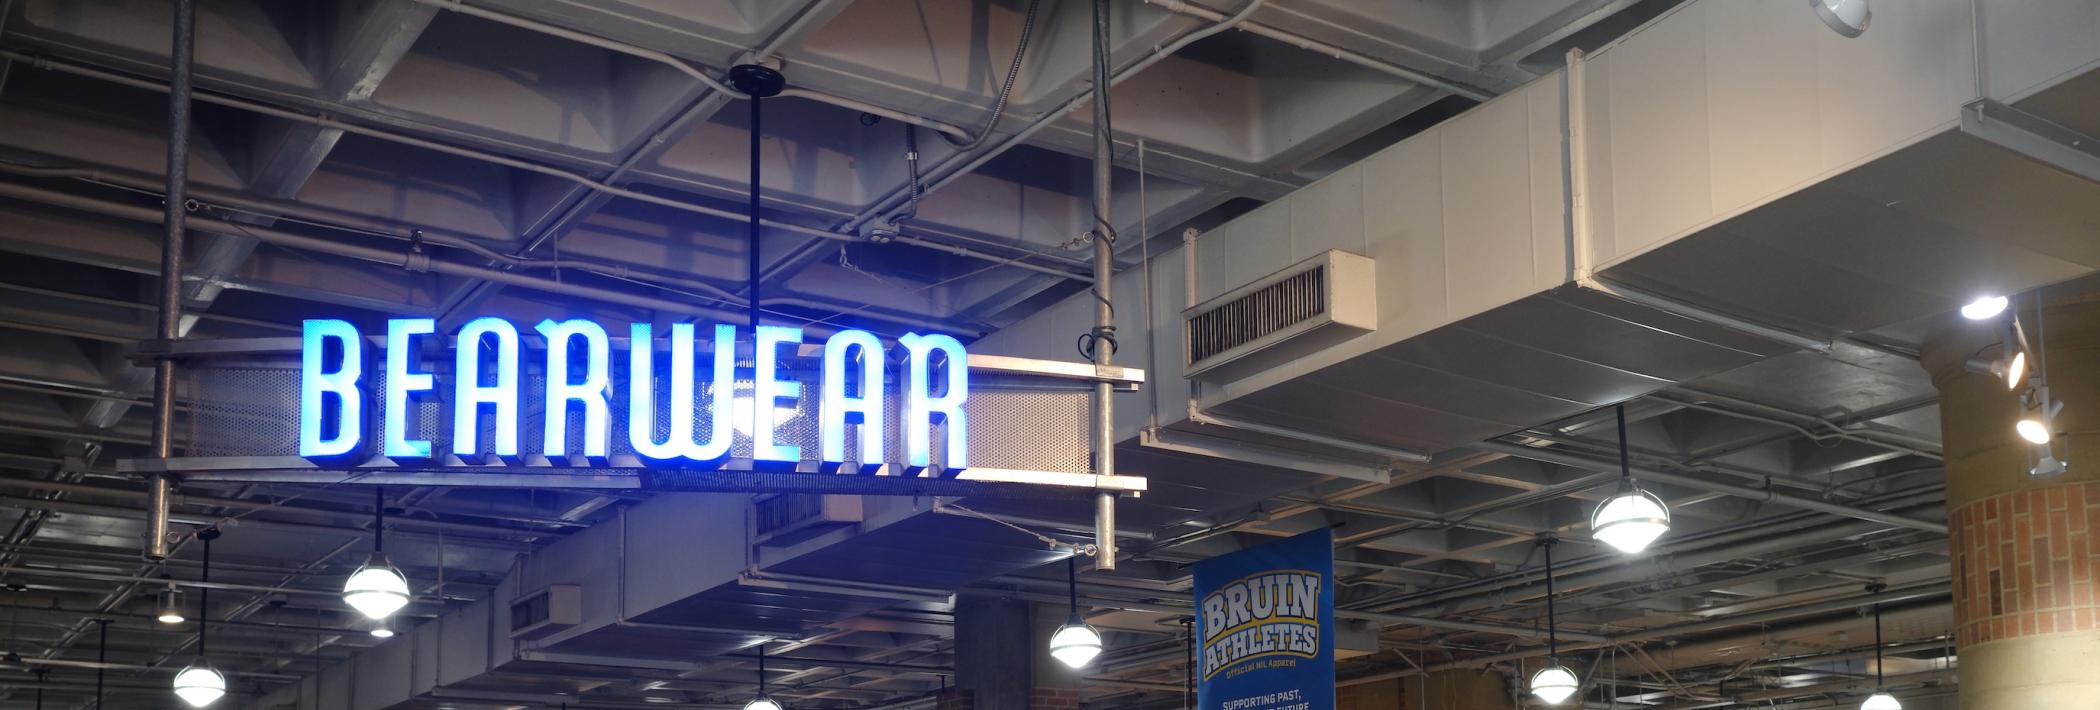 A sign saying Bearwear hanging from the ceiling around various clothing options